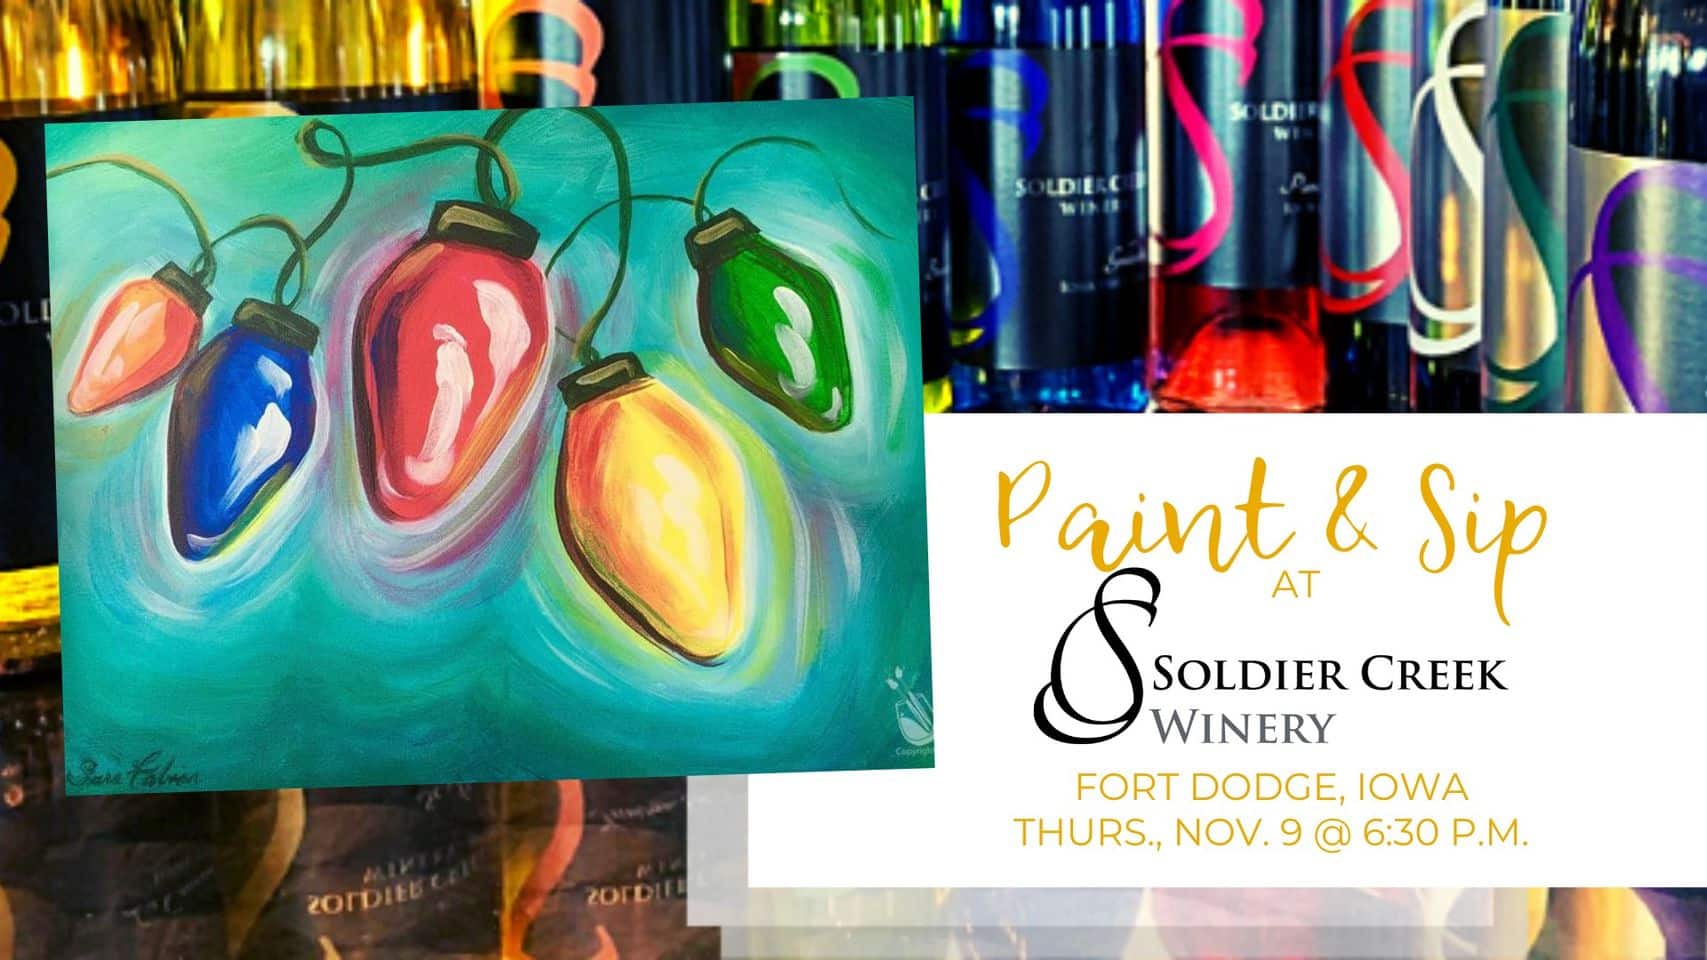 paint and sip with painting with a twist at soldier creek winery. craft nights are once a month, on select thursdays from 6:30-8:30pm. Paint & sip is on thursday, november 9th. click the image to sign up!